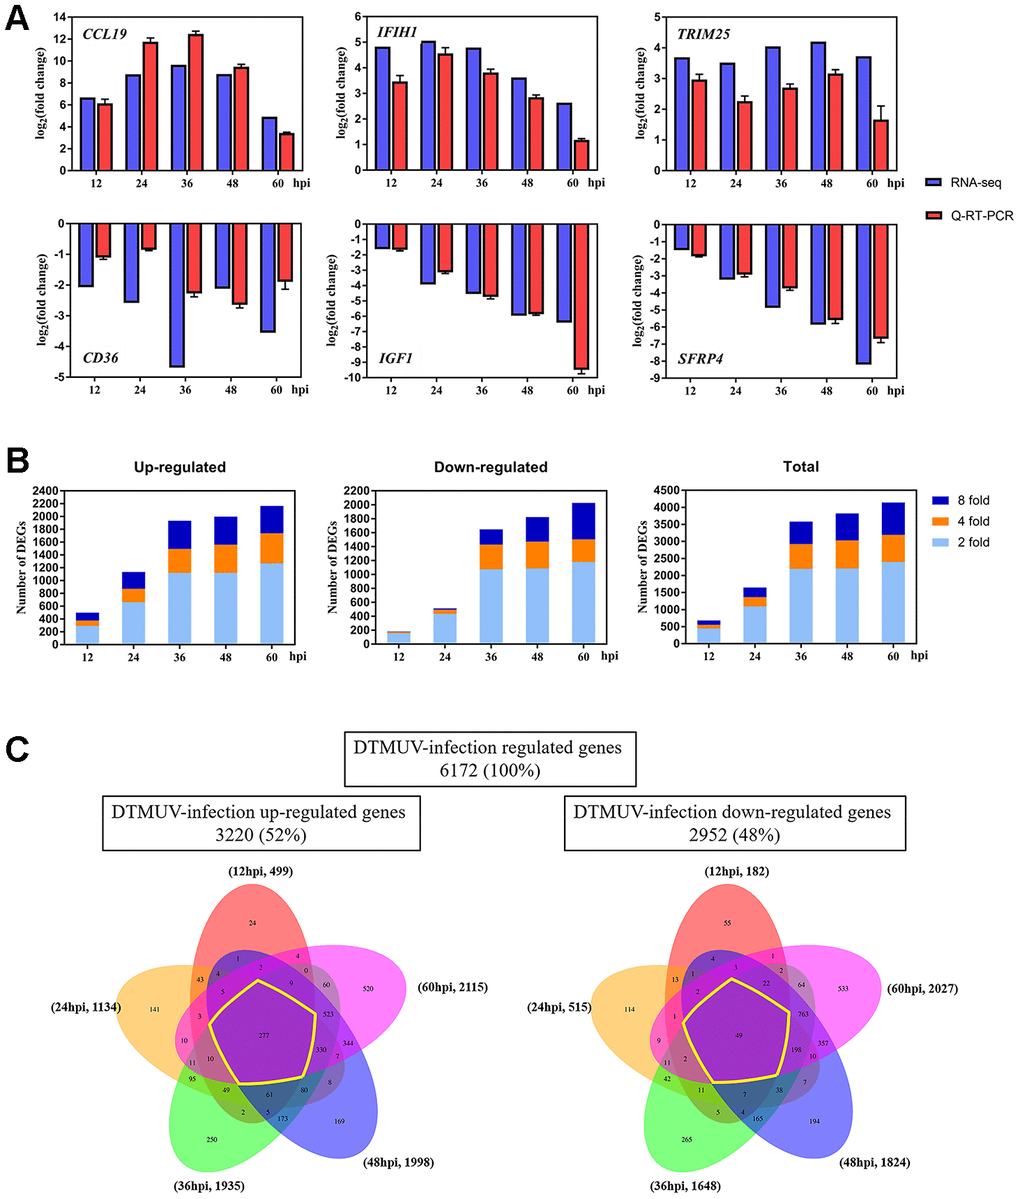 Changes of the gene expression in DEFs at different times after DTMUV infection. (A) Q-RT-PCR versus RNA-seq analyses of the expression for representative six genes (CCL19, IFIH1, TRIM25, CD36, IGF1 and SFRP4). (B) The upregulated/downregulated number and total number of DEGs (≥ twofold change, PC) Venn diagrams showing overlap of DTMUV-induced DEGs across different time points. Upregulated and downregulated genes were analyzed separately and have been shown with the number of genes specifically or commonly responsive at different time points.